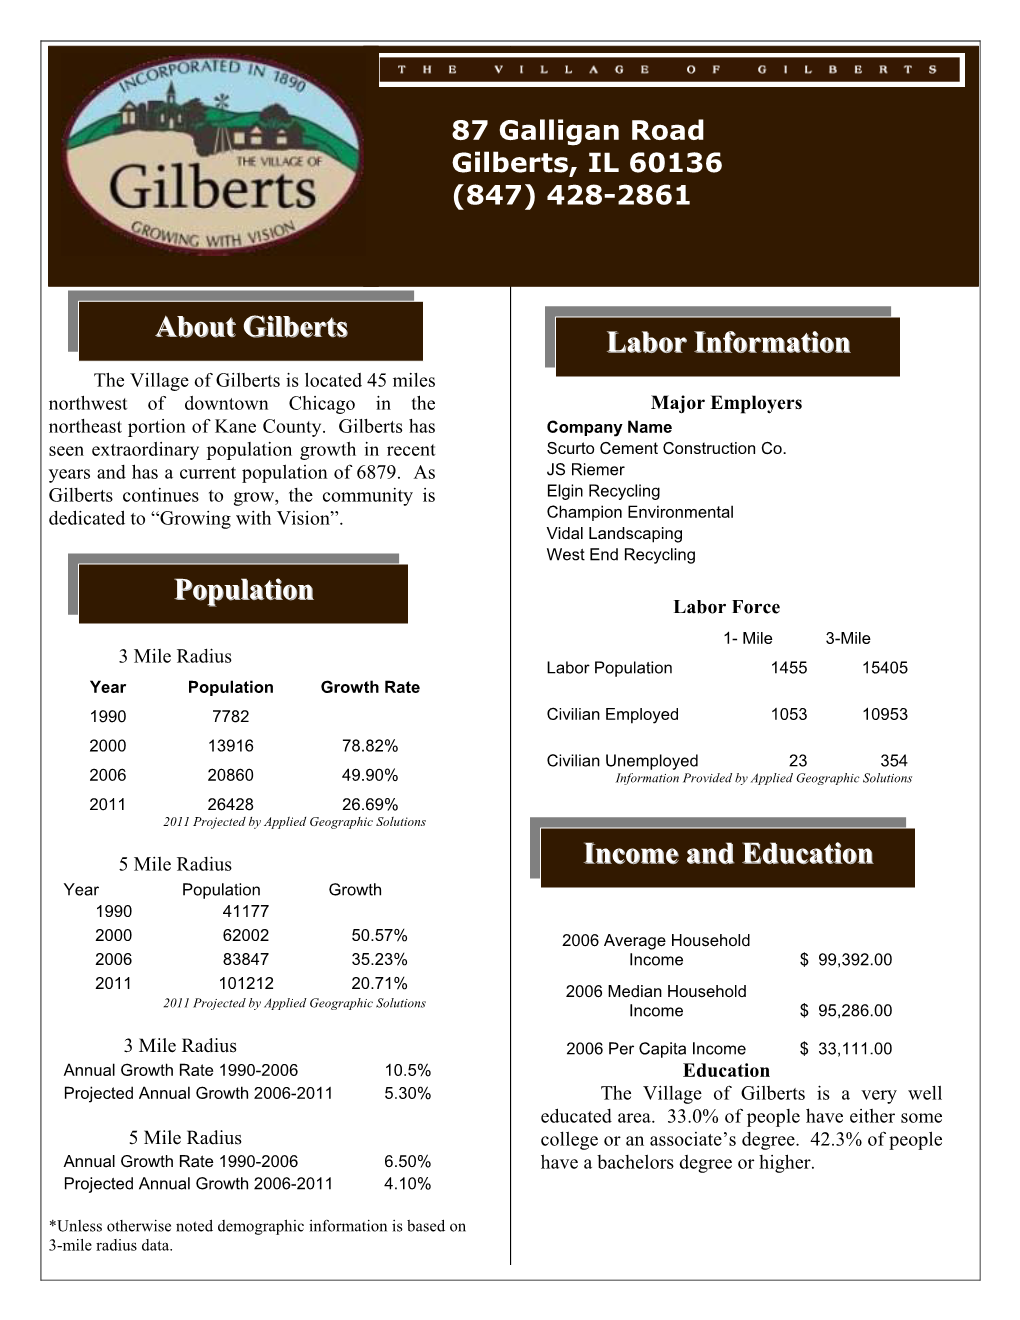 About Gilberts Population Labor Information Income and Education